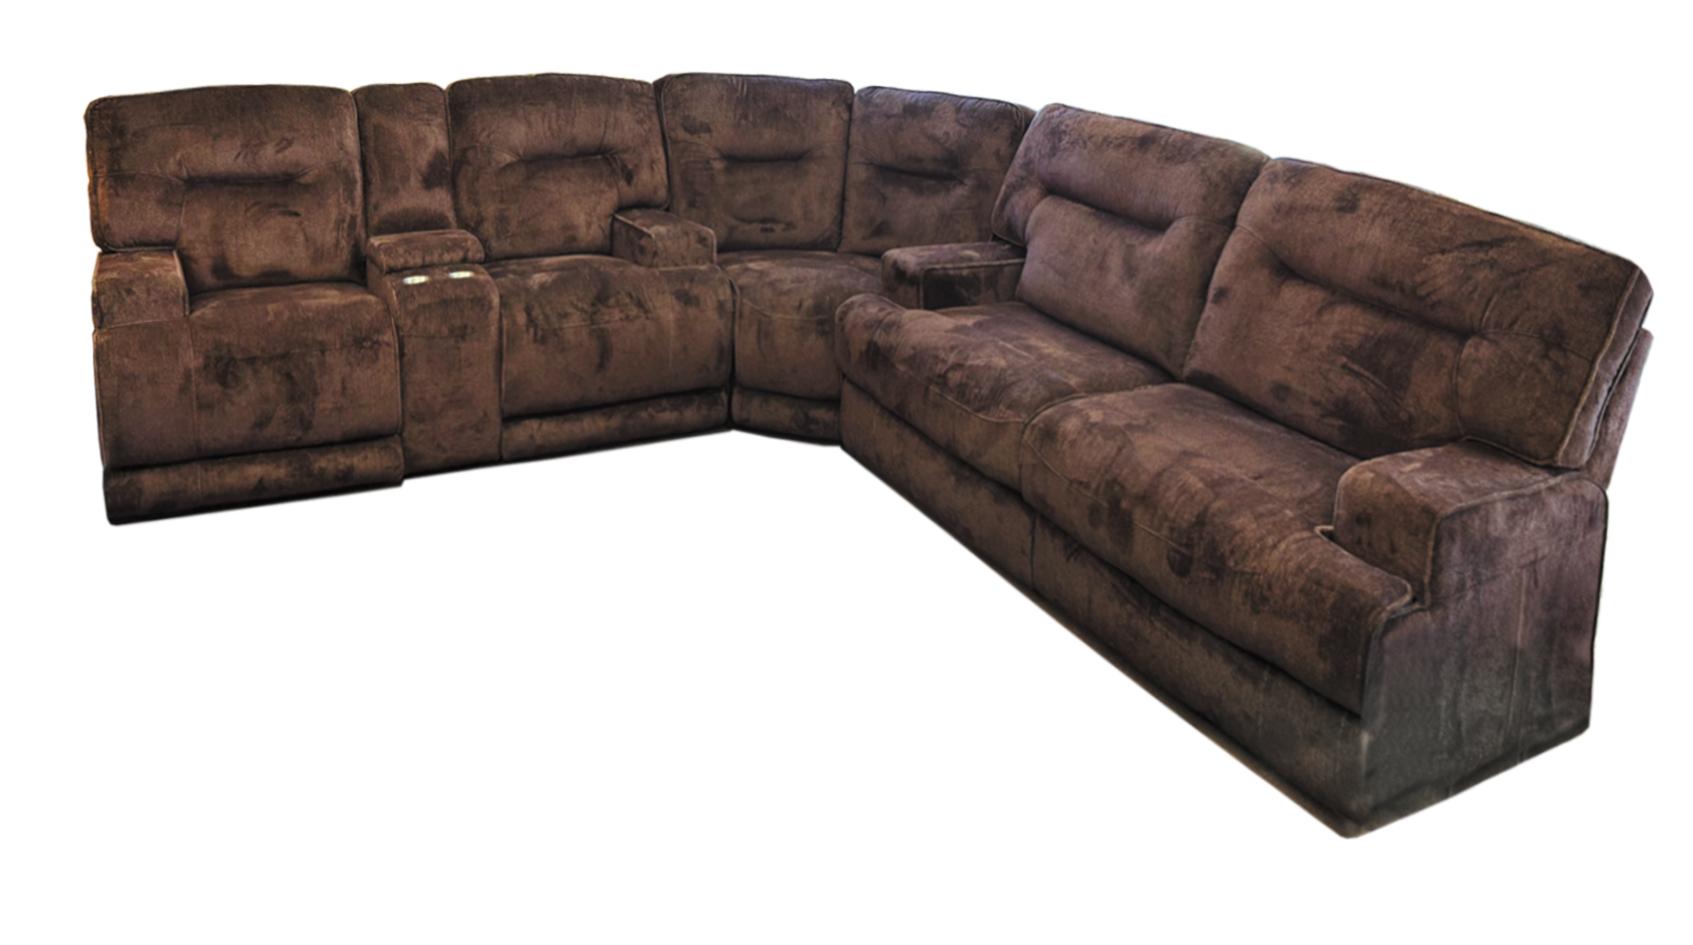 Chocolate 3 piece sectional gordon with power loveseat and full sleeper